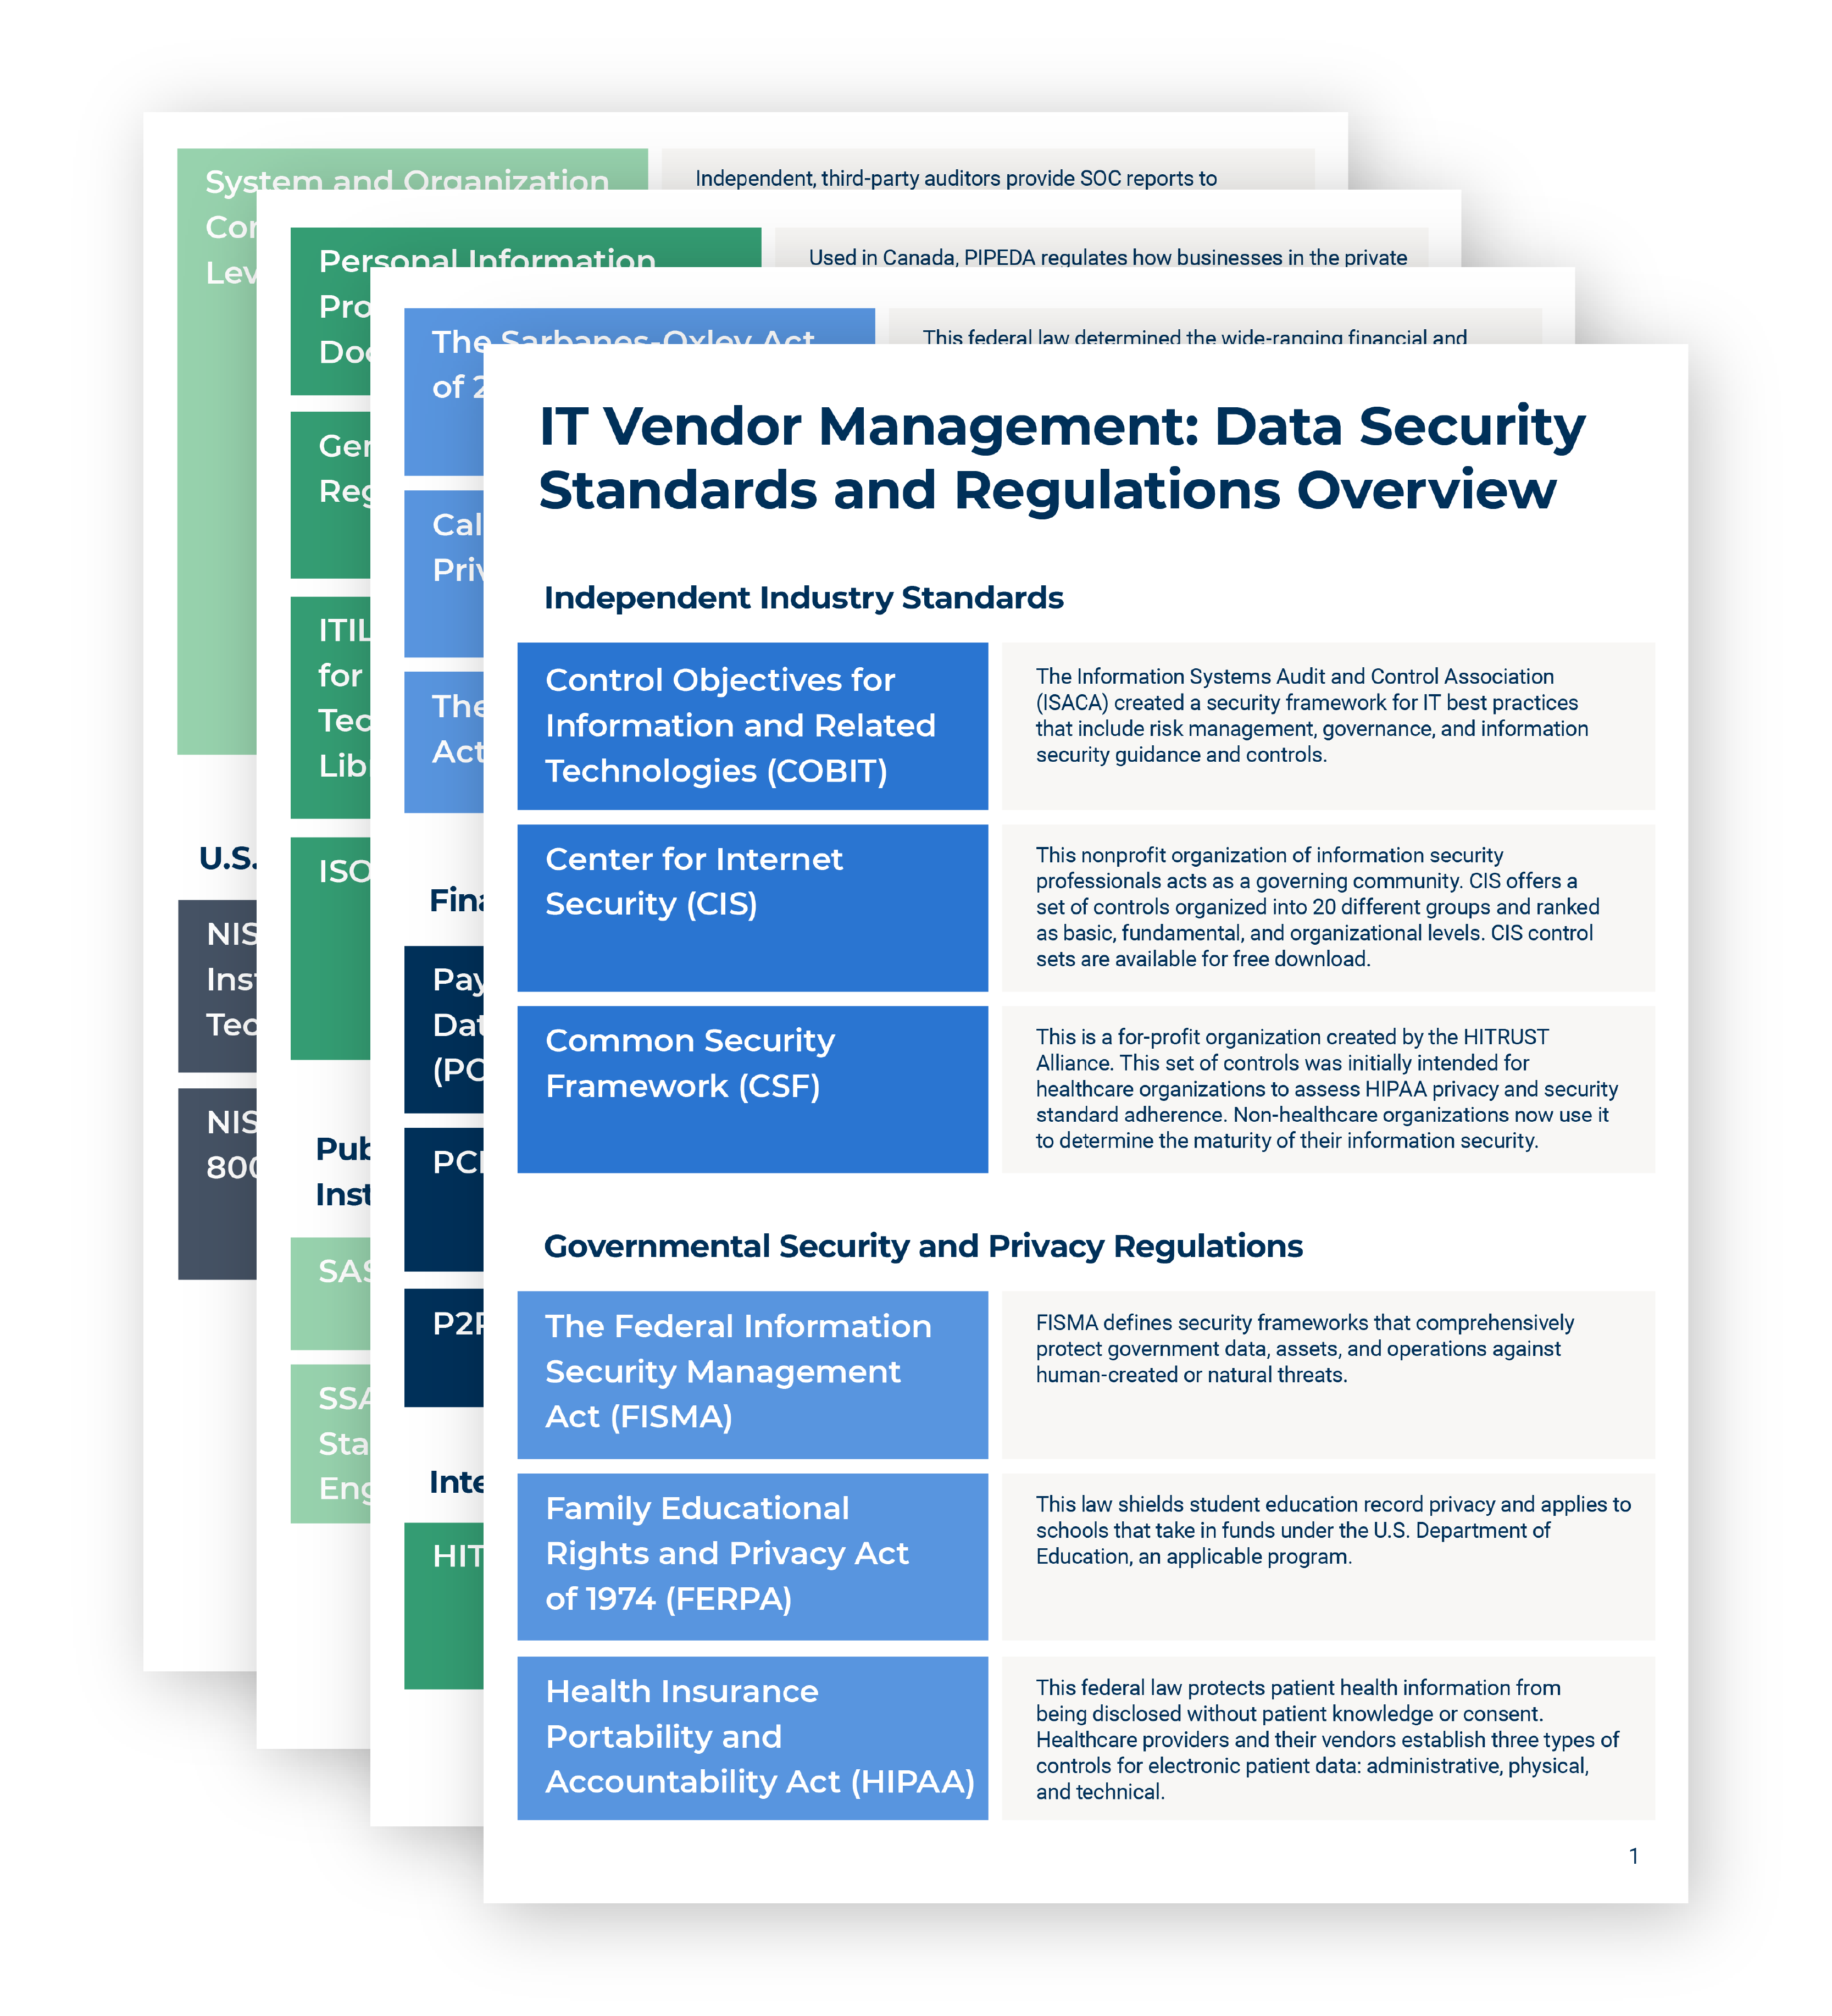 IT Vendor Management Data Security Standards and Regulations Overview